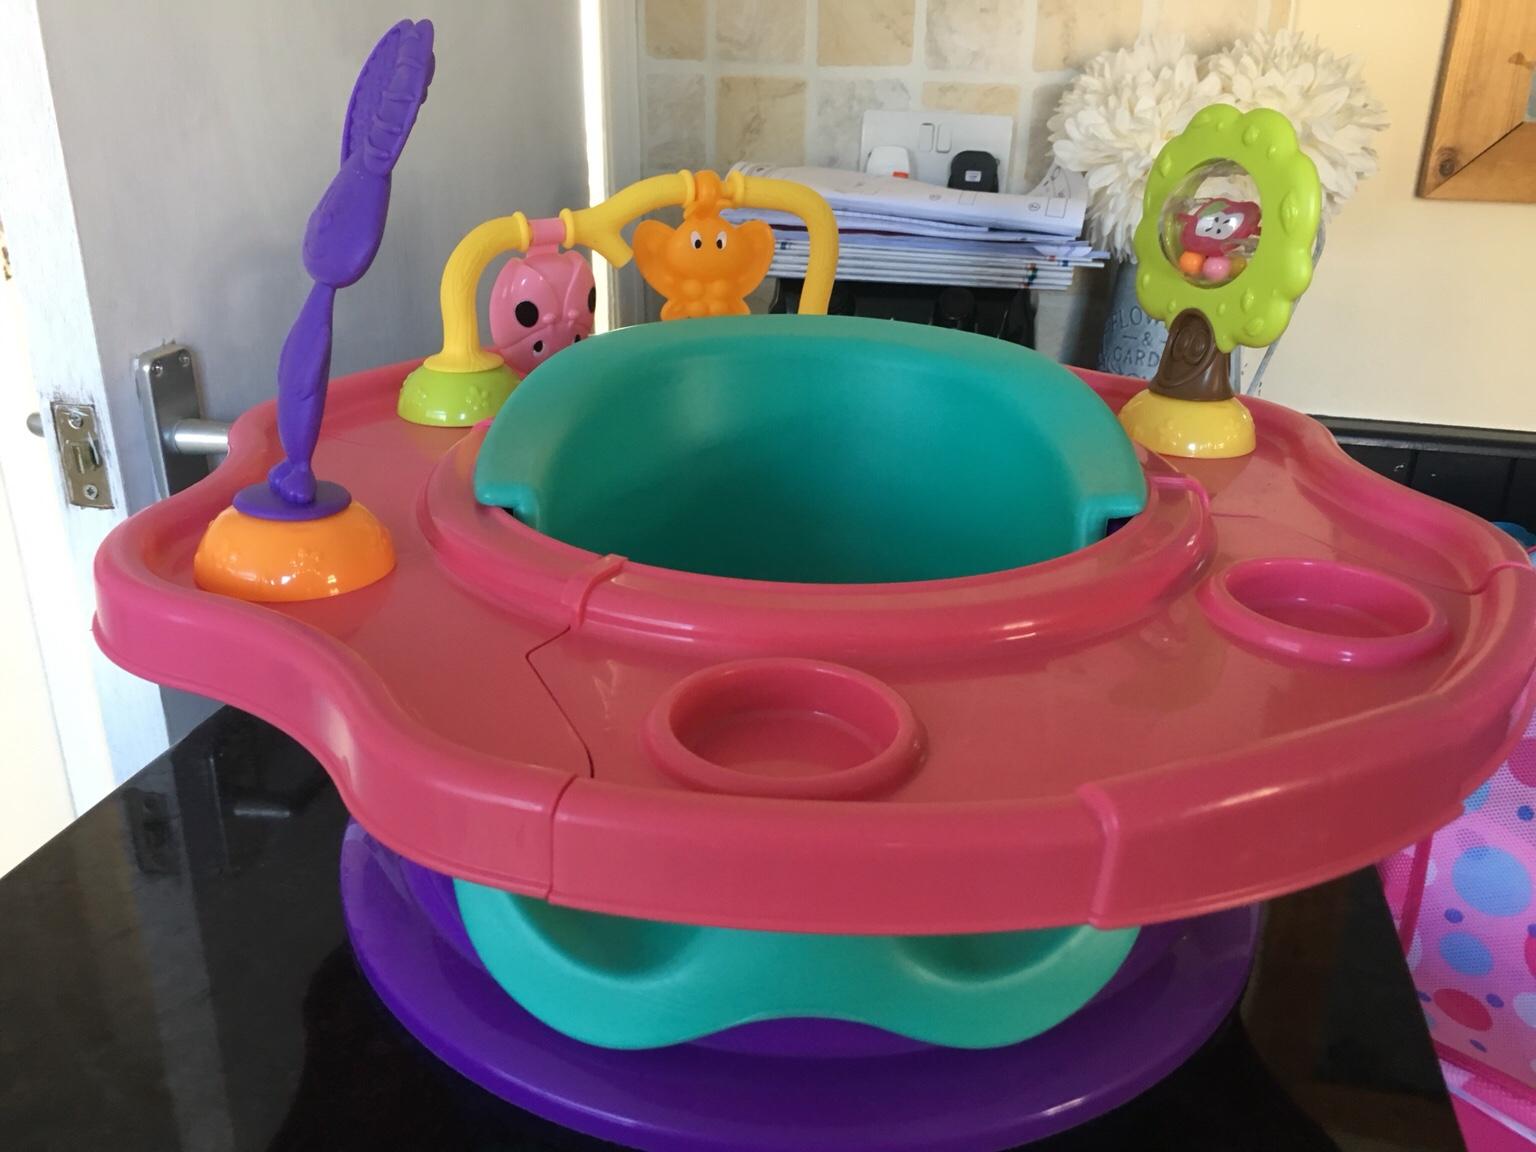 Baby Booster Activity Chair In Rh19 Sussex For 5 00 For Sale